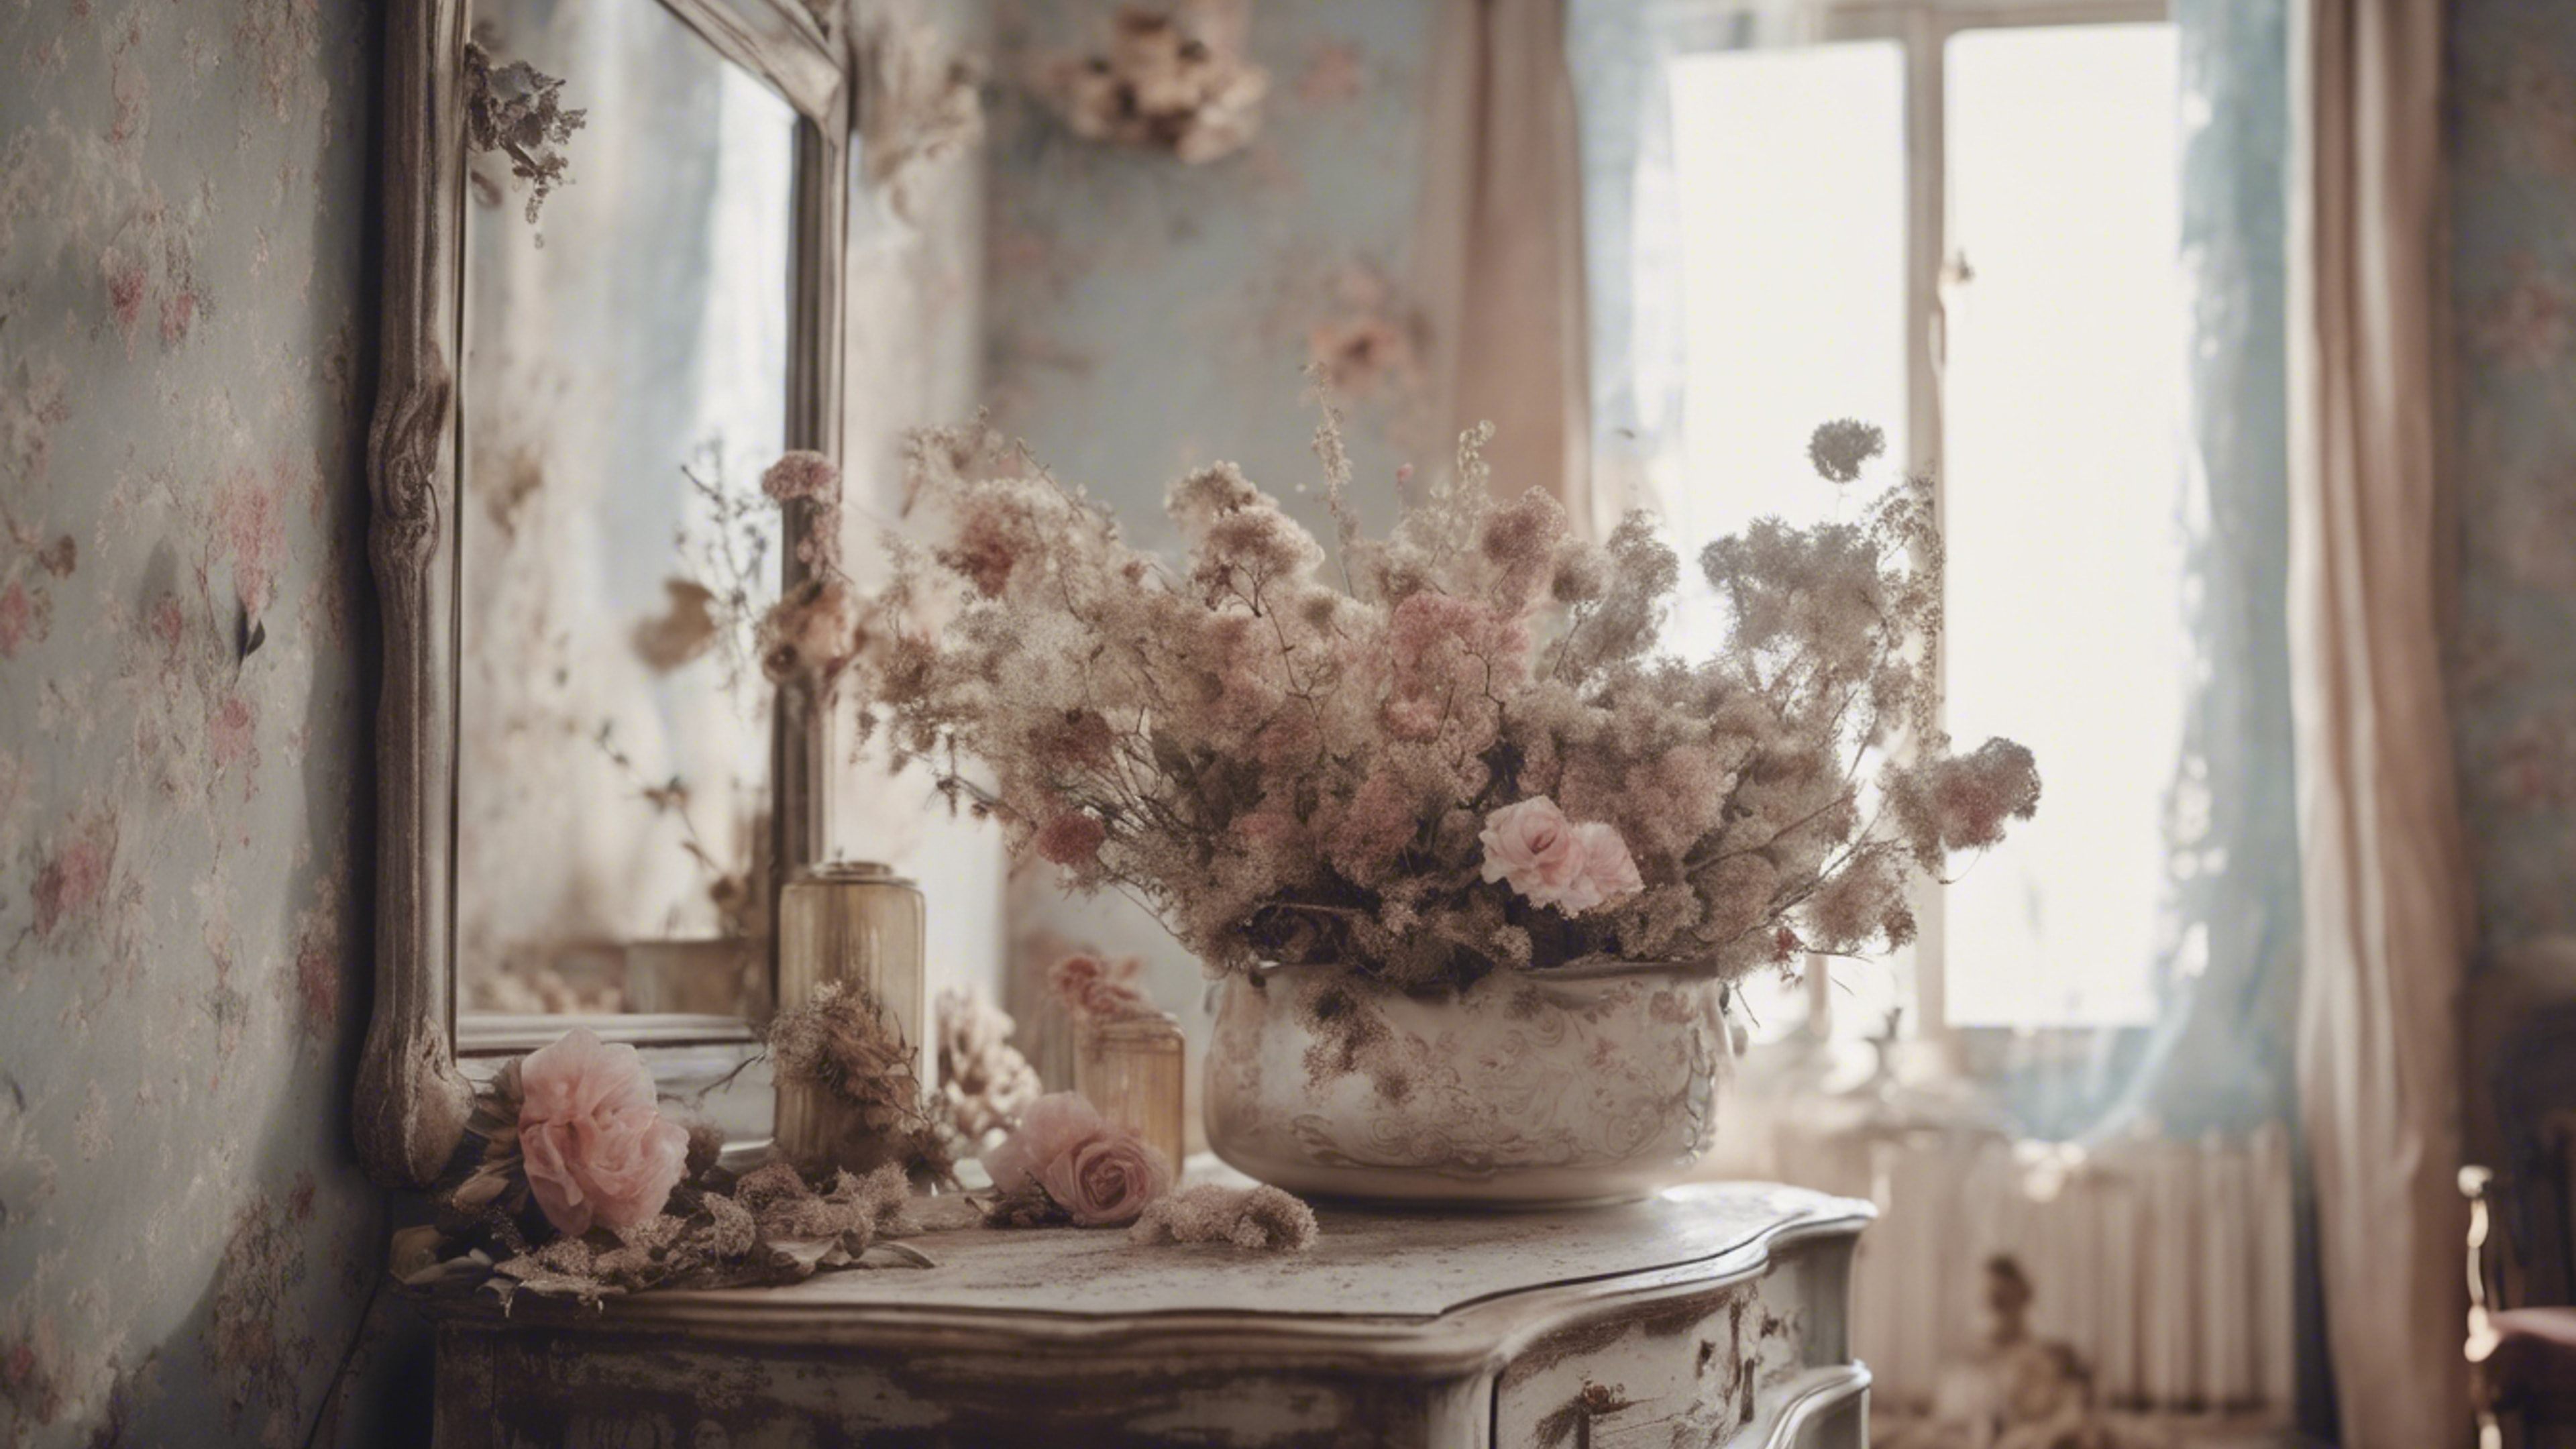 A shabby chic bedroom, decorated with dried flowers and antique, well-loved furniture.壁紙[fbba06827be04bc9b02f]